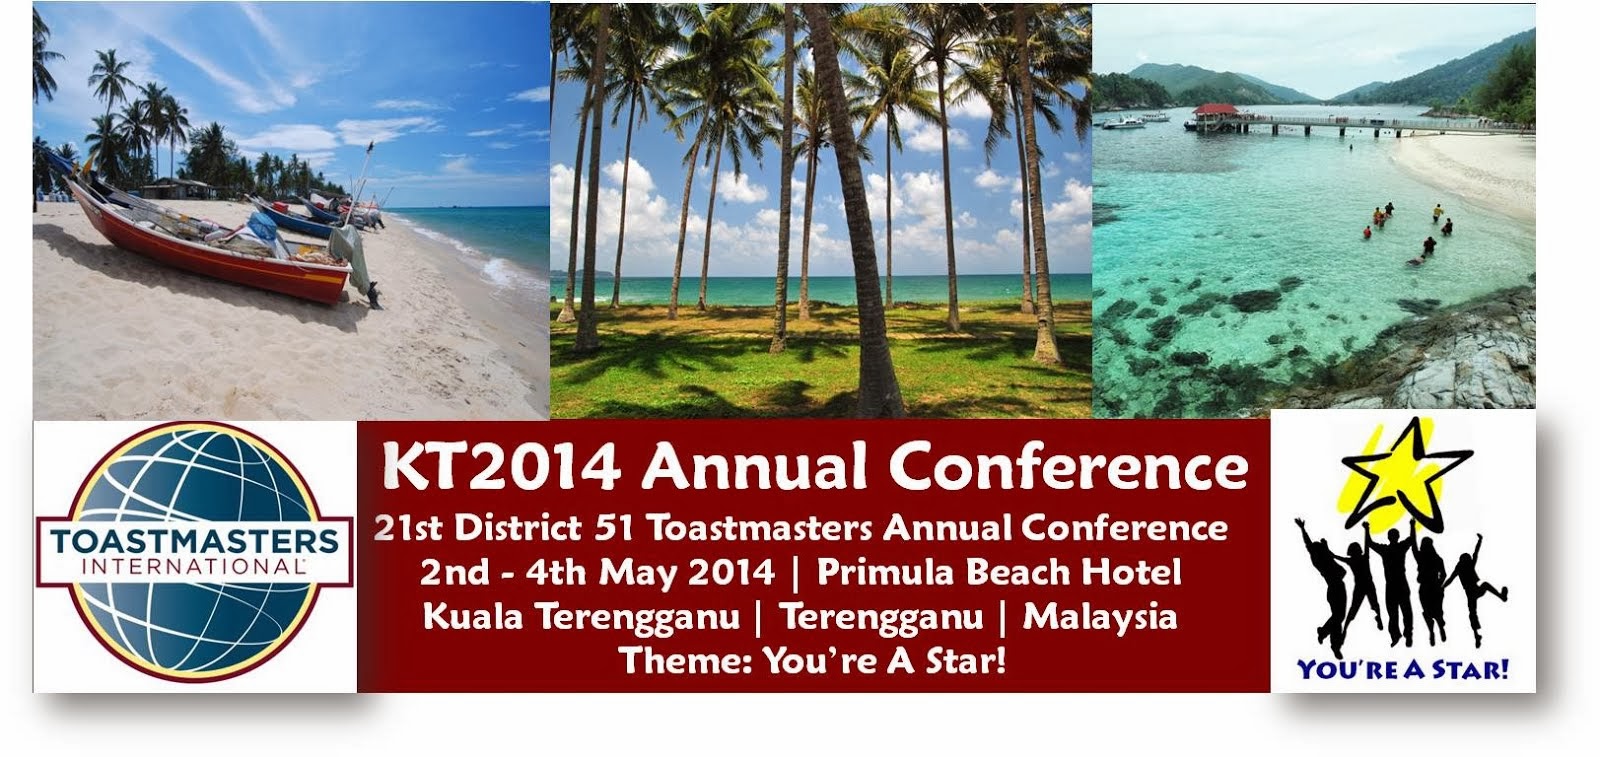 KT2014 Annual Convention